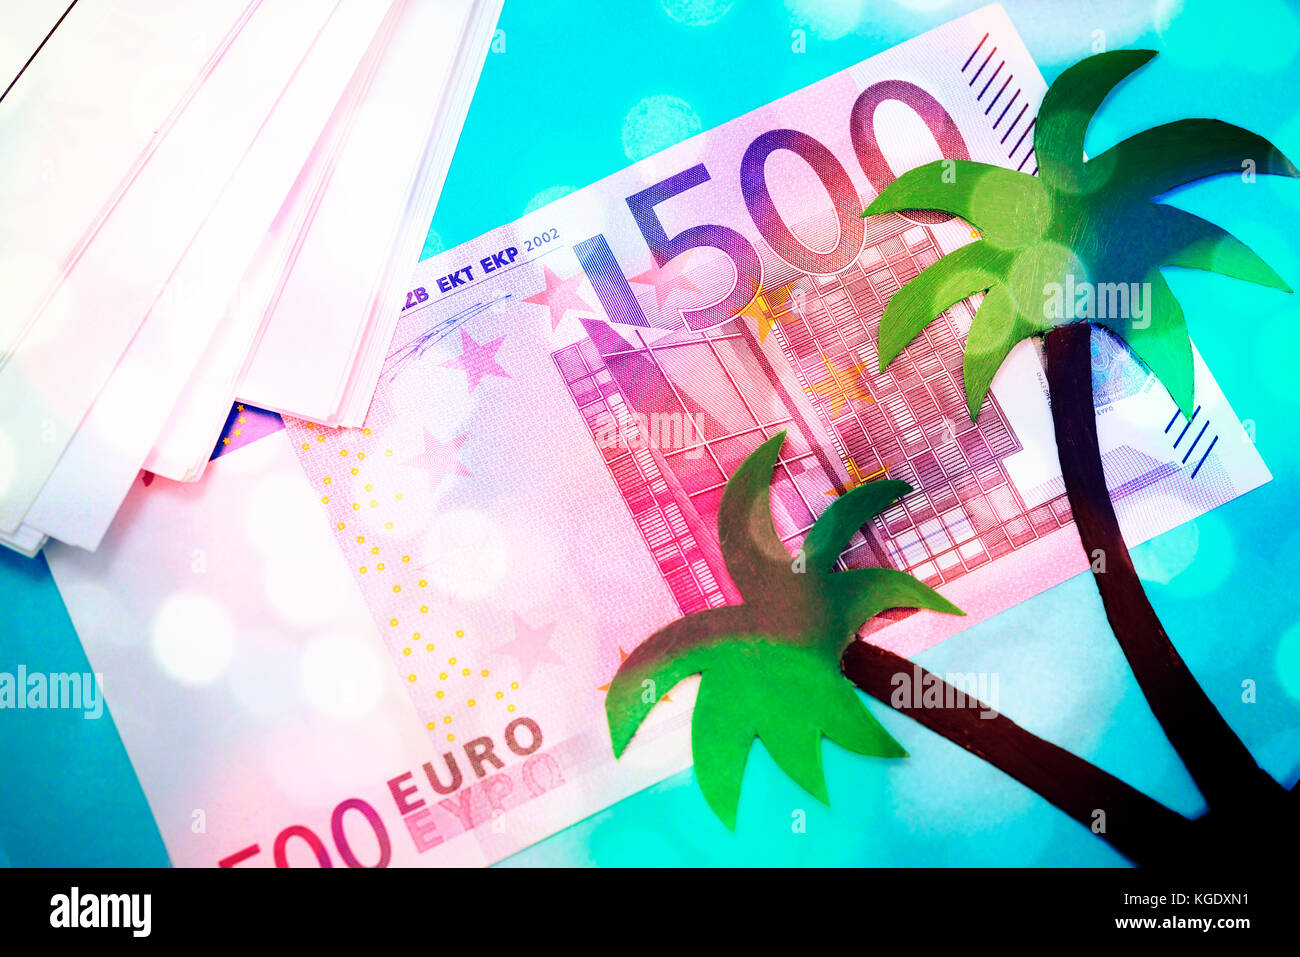 Paper palm tree on euro bill, paradise papers Stock Photo